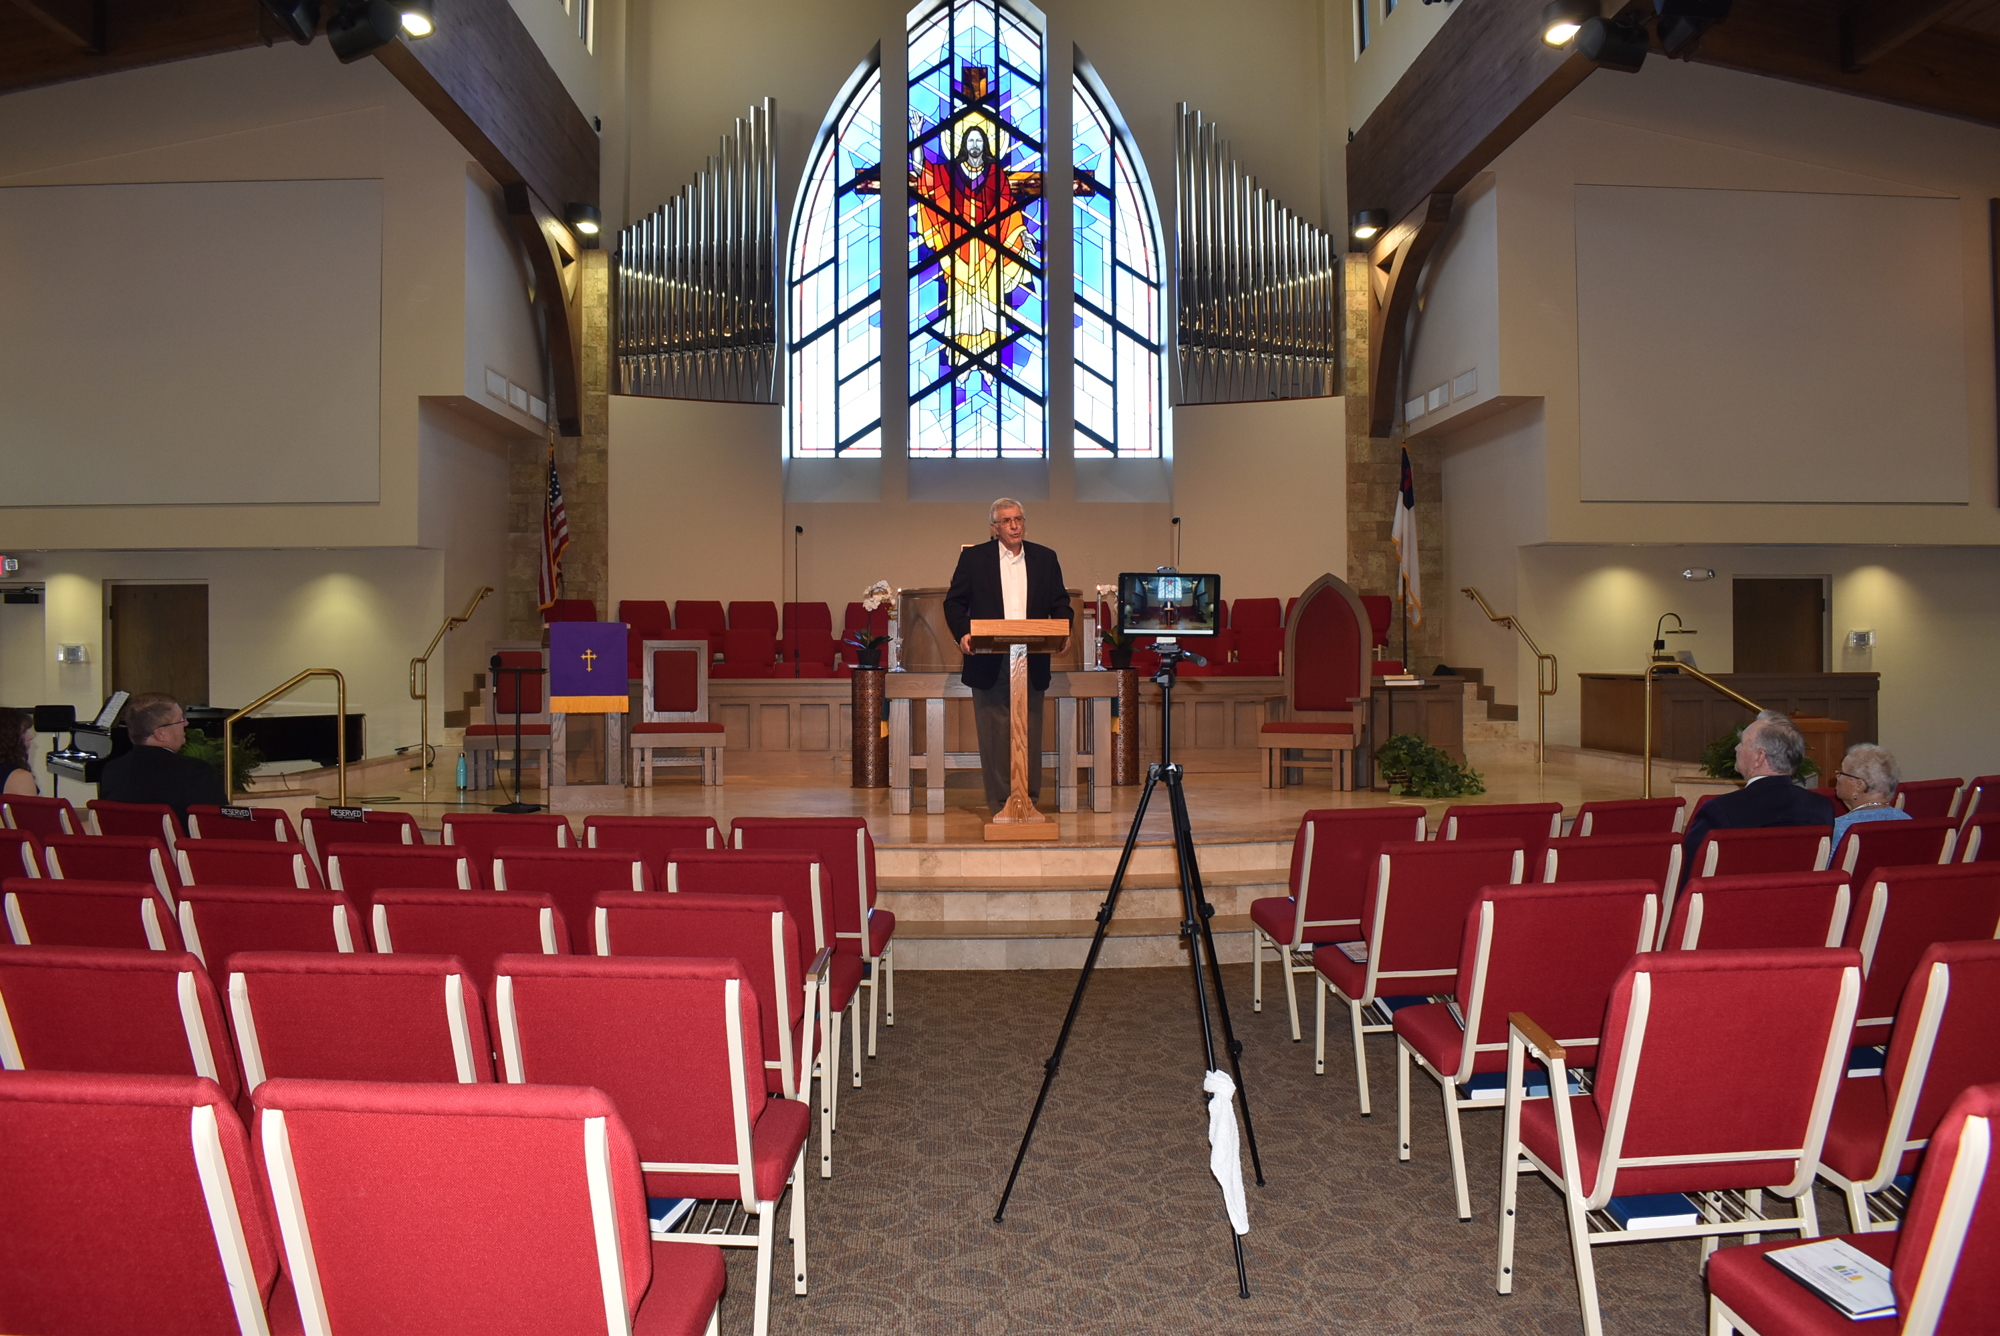 March 19: The Rev. Norman Prichard preaches to the camera and a few churchgoers at Christ Church of Longboat Key.